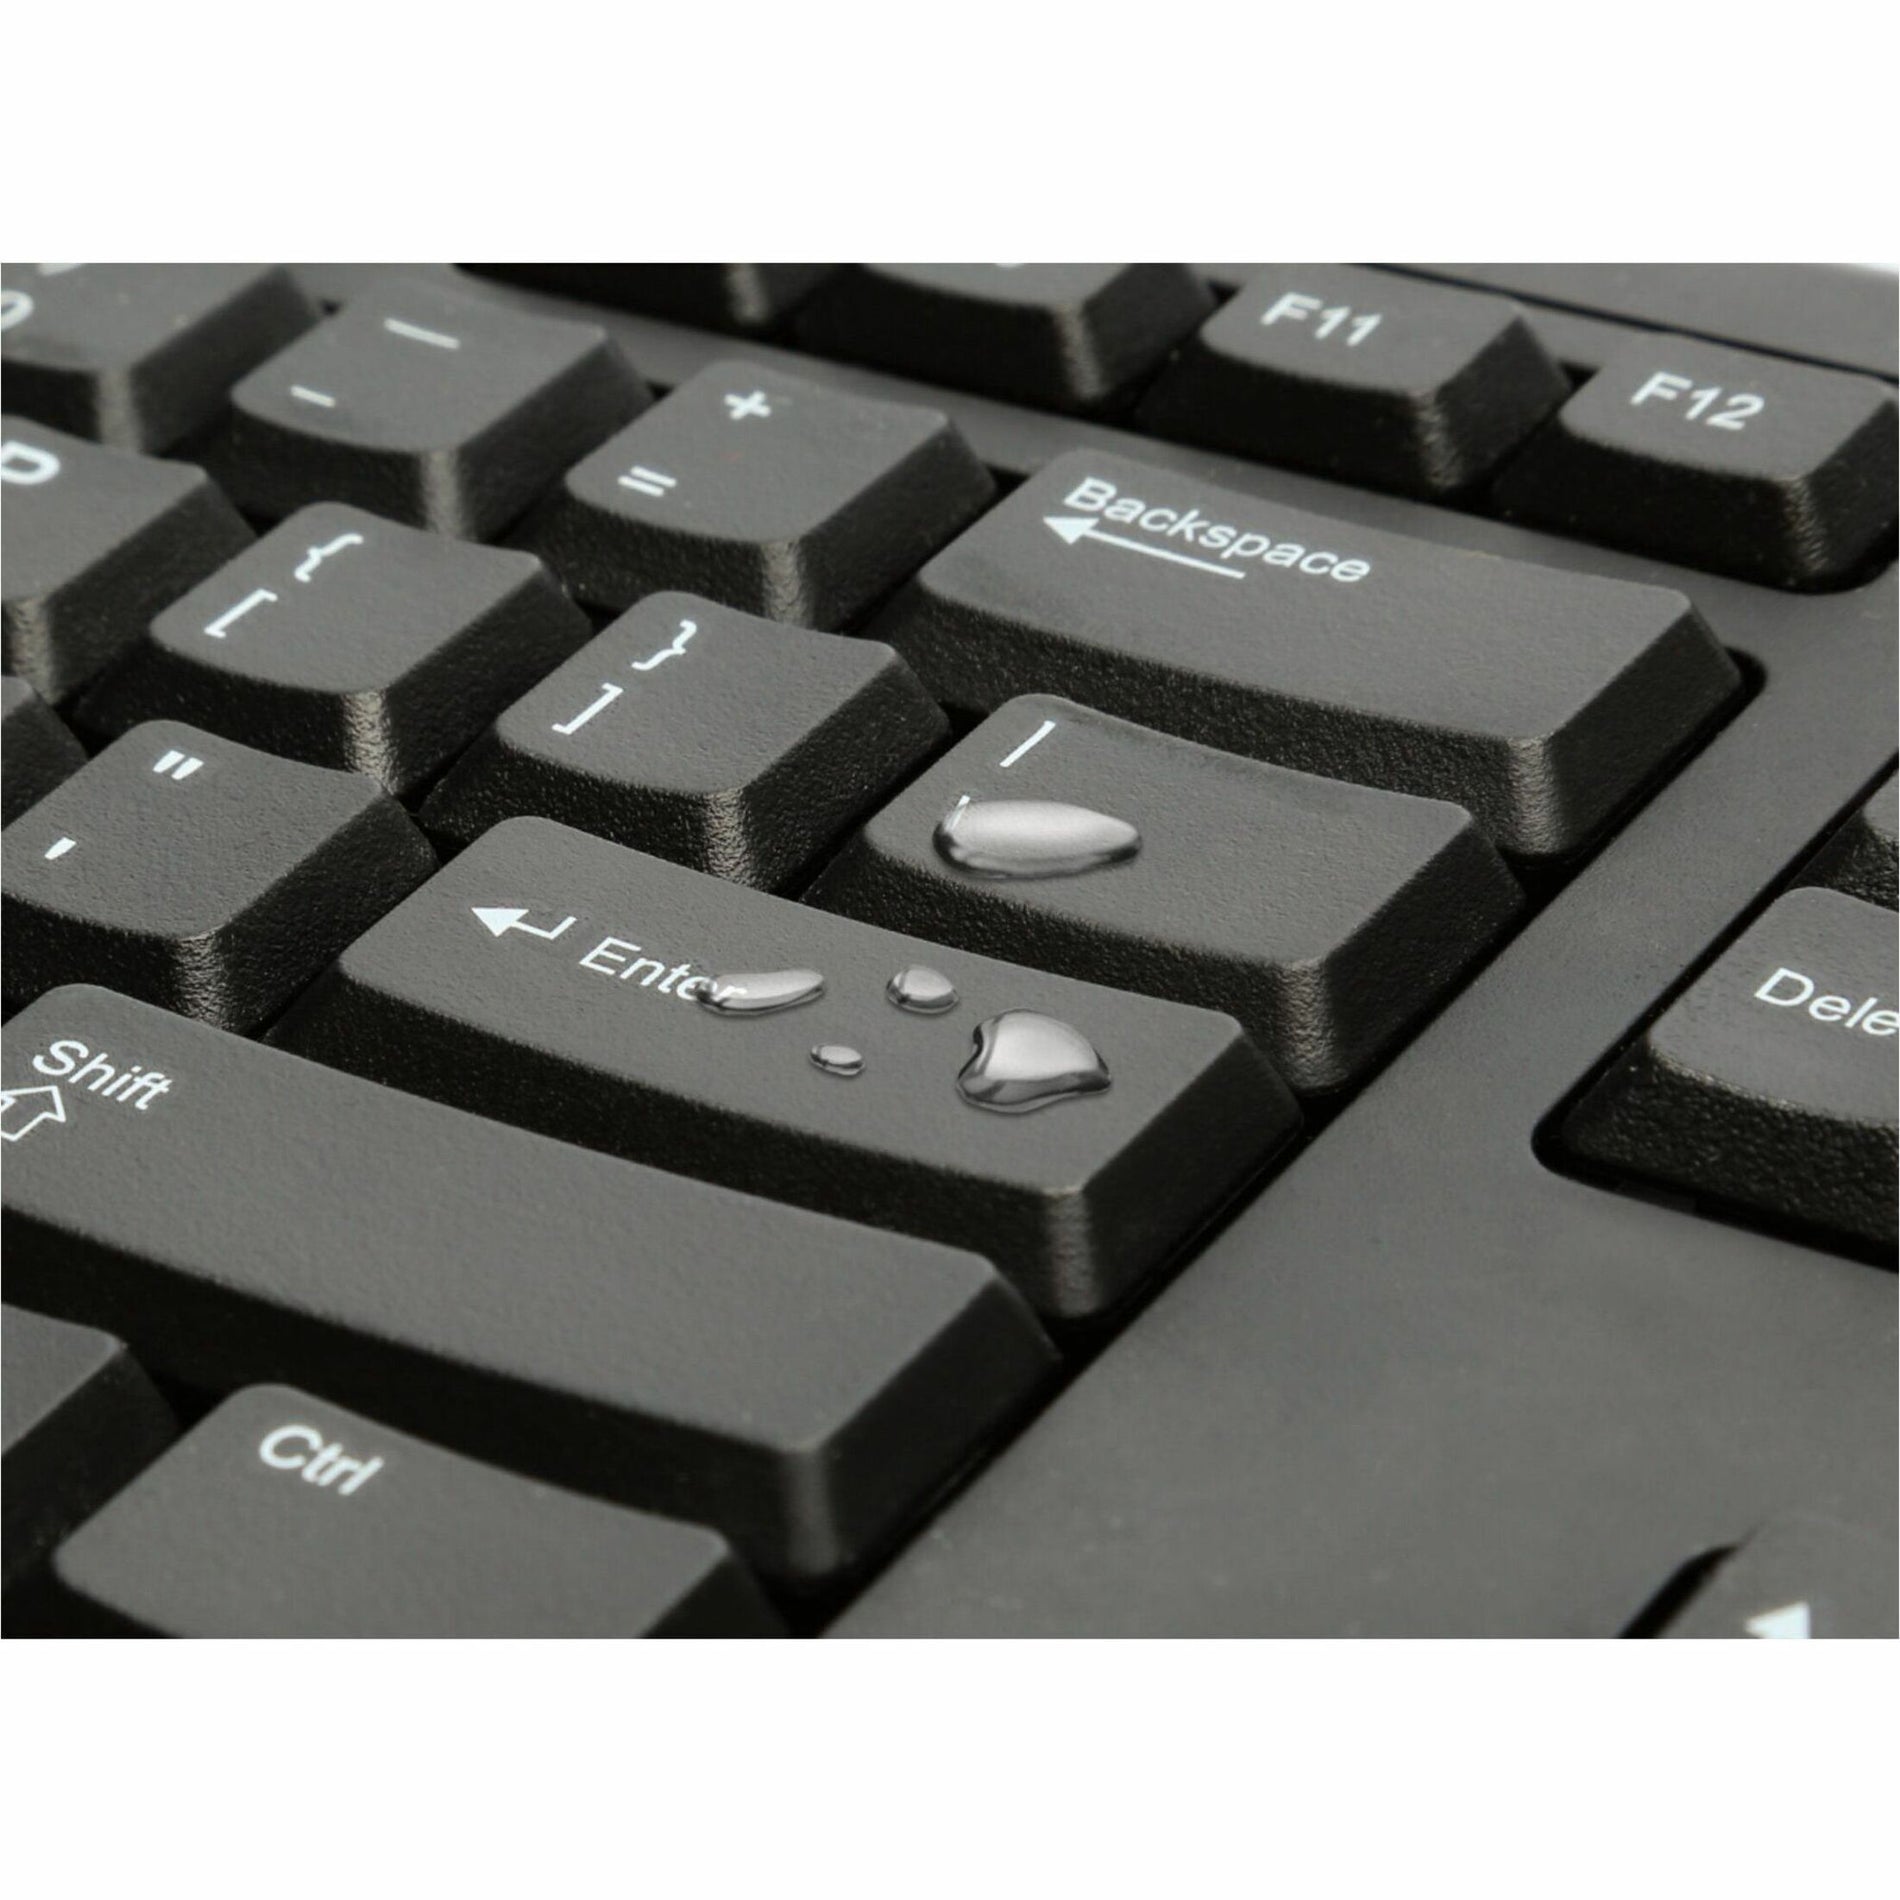 Kensington K64370A Keyboard for Life, Spill Proof, USB Cable, Black